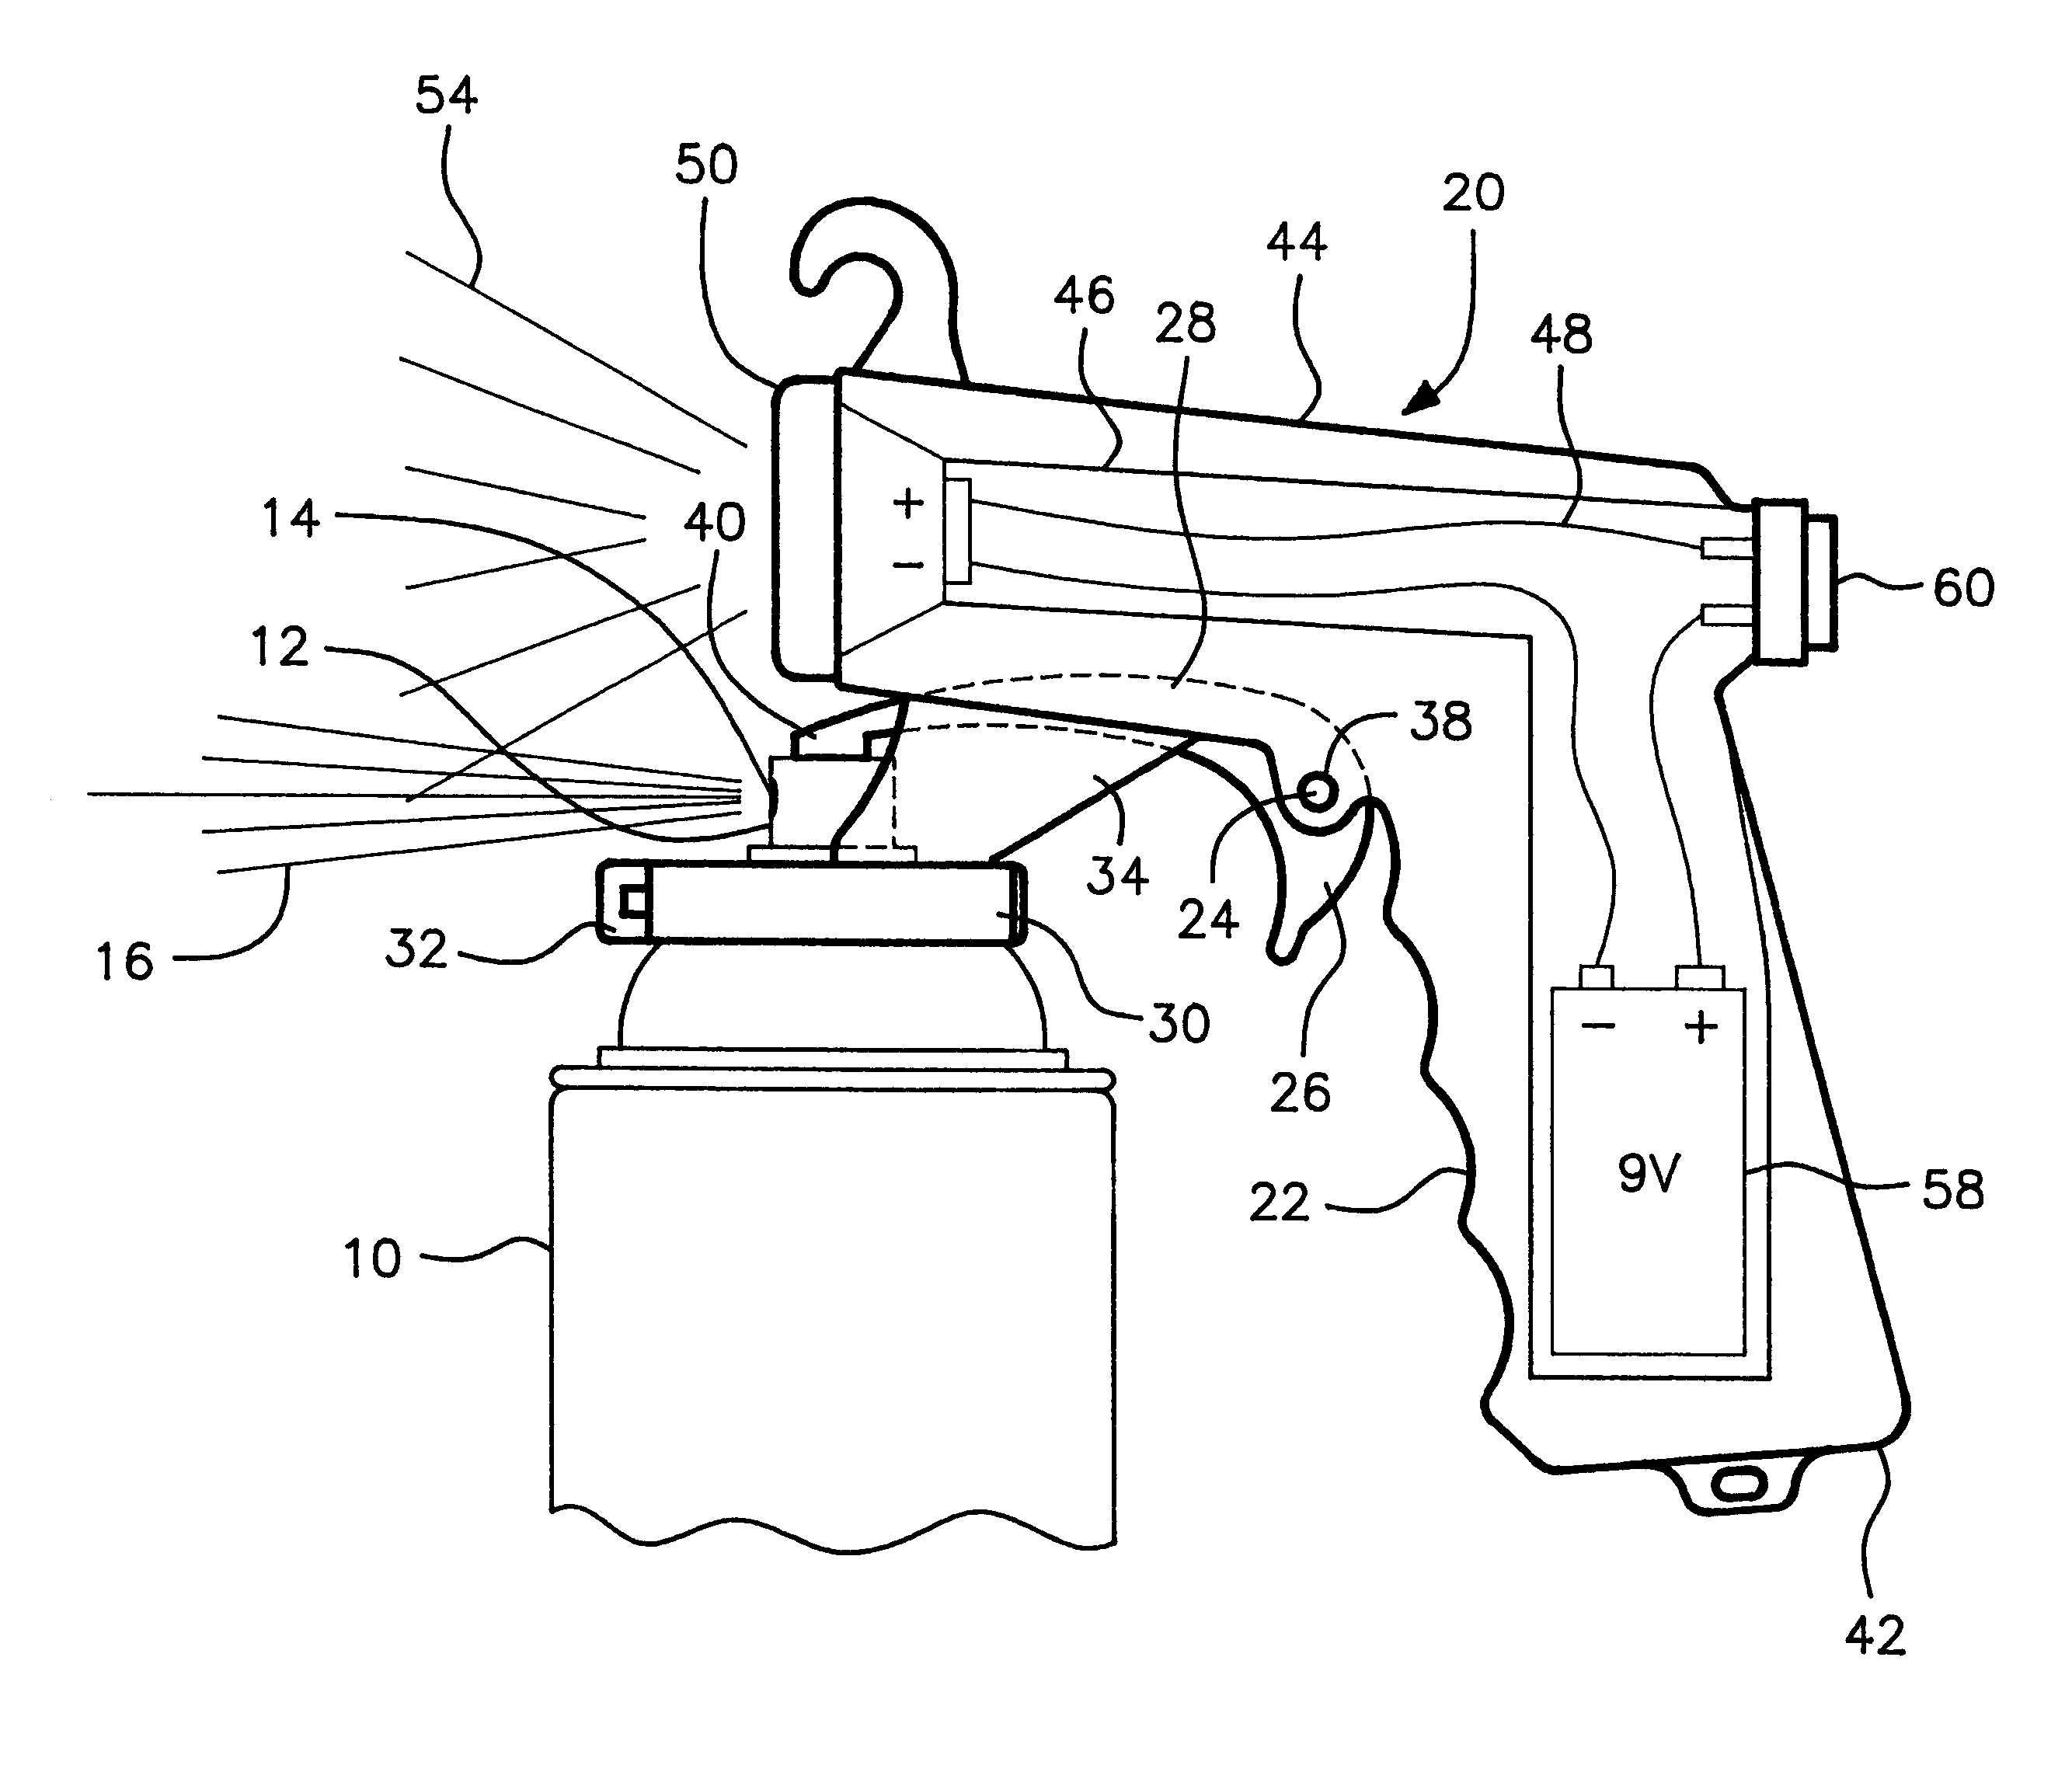 Illuminating pistol-type device for a plunger actuated aerosol can